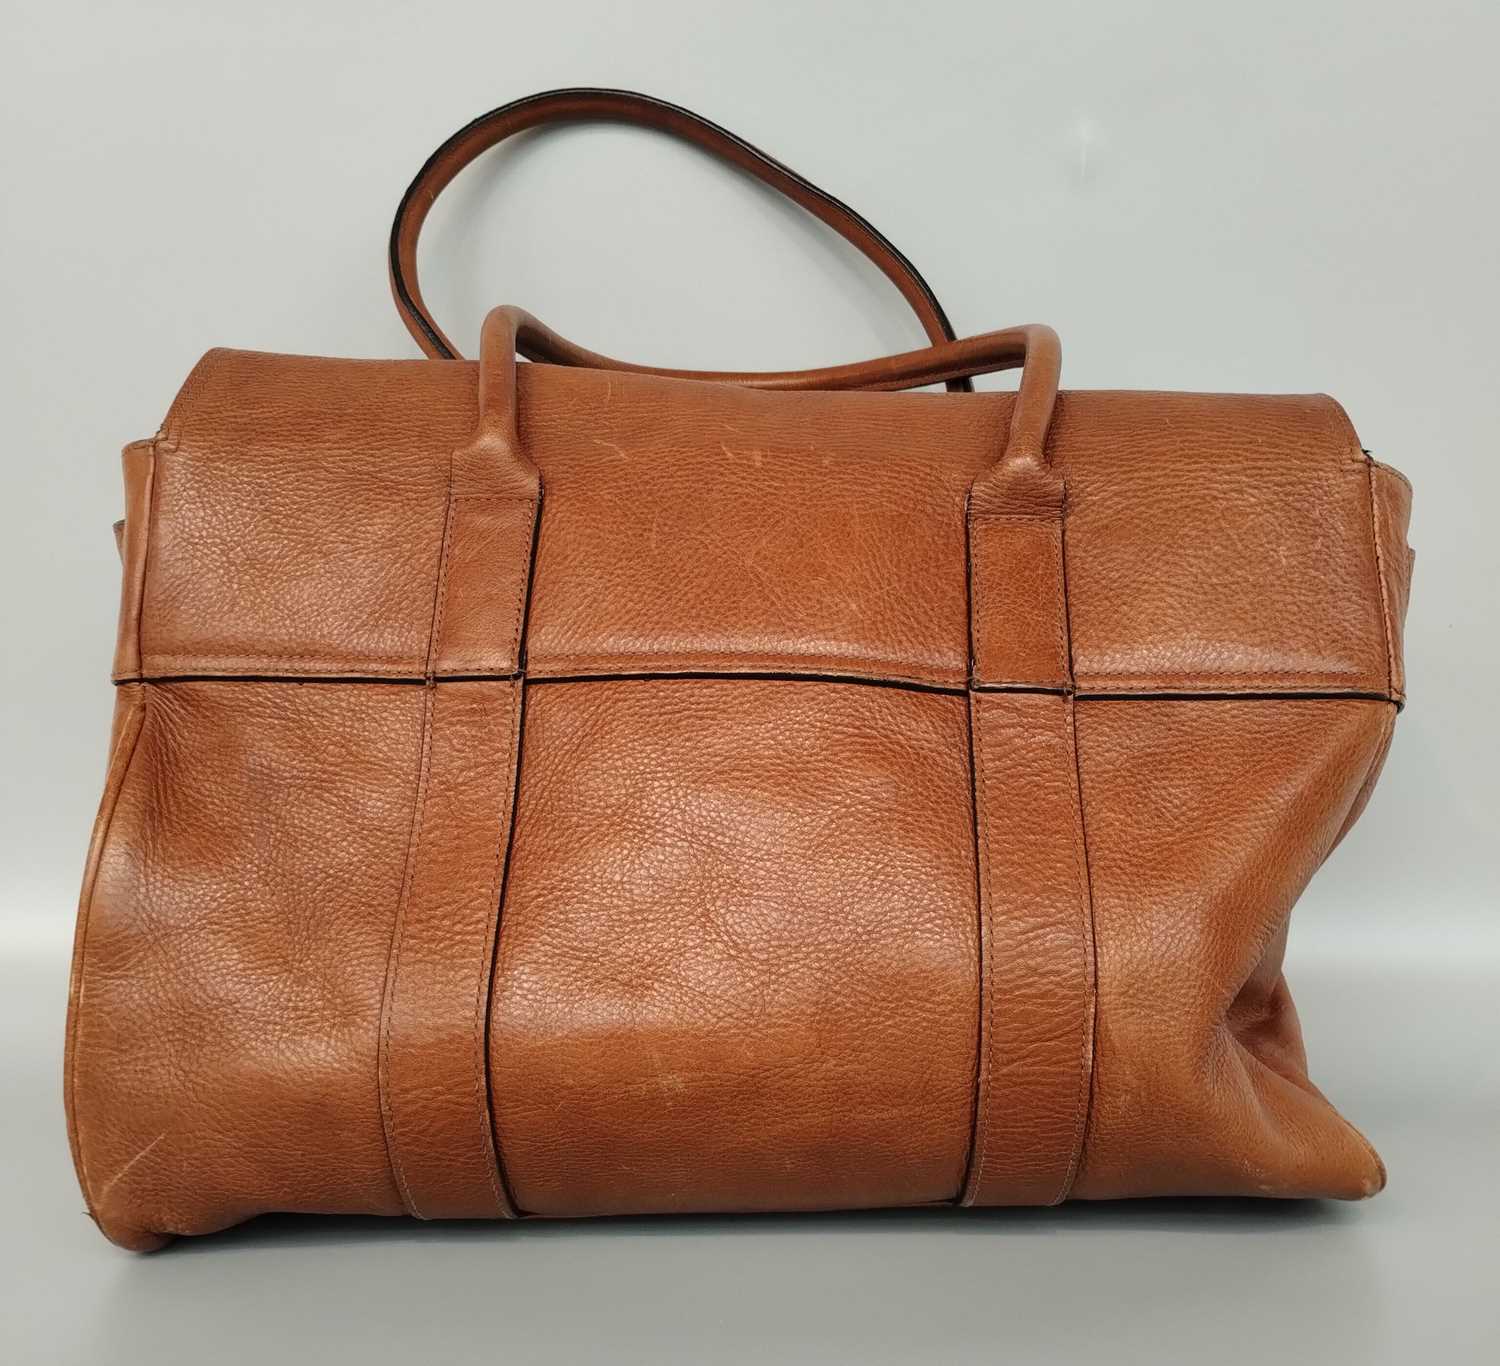 Mulberry Tan Leather Bayswater Rio Patchwork Bag with brass hardware, adjustable tabs and buckles, - Image 3 of 11